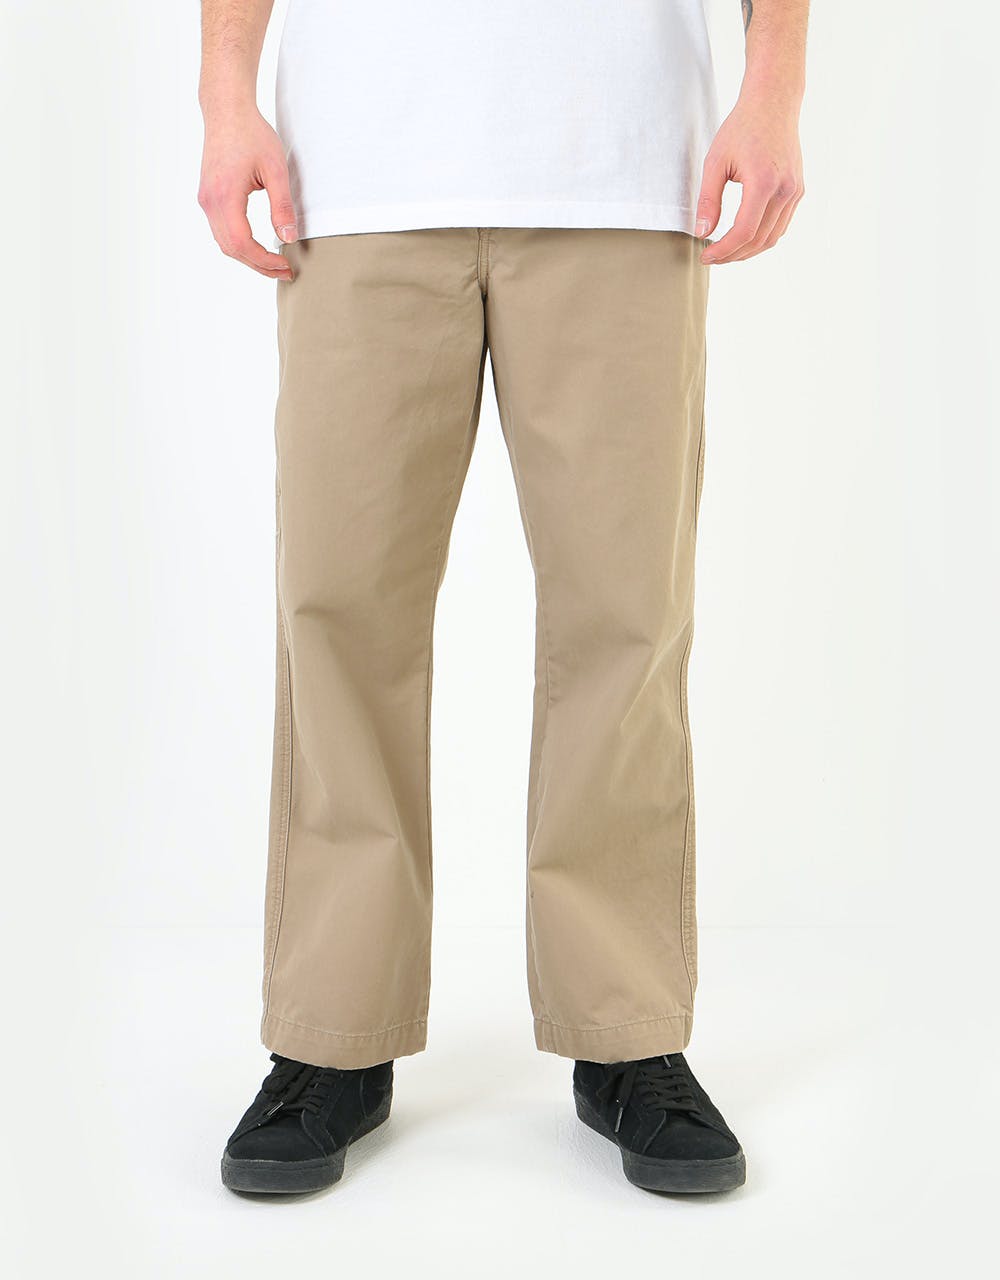 Carhartt WIP Dallas Pant - Leather (Stone Washed)